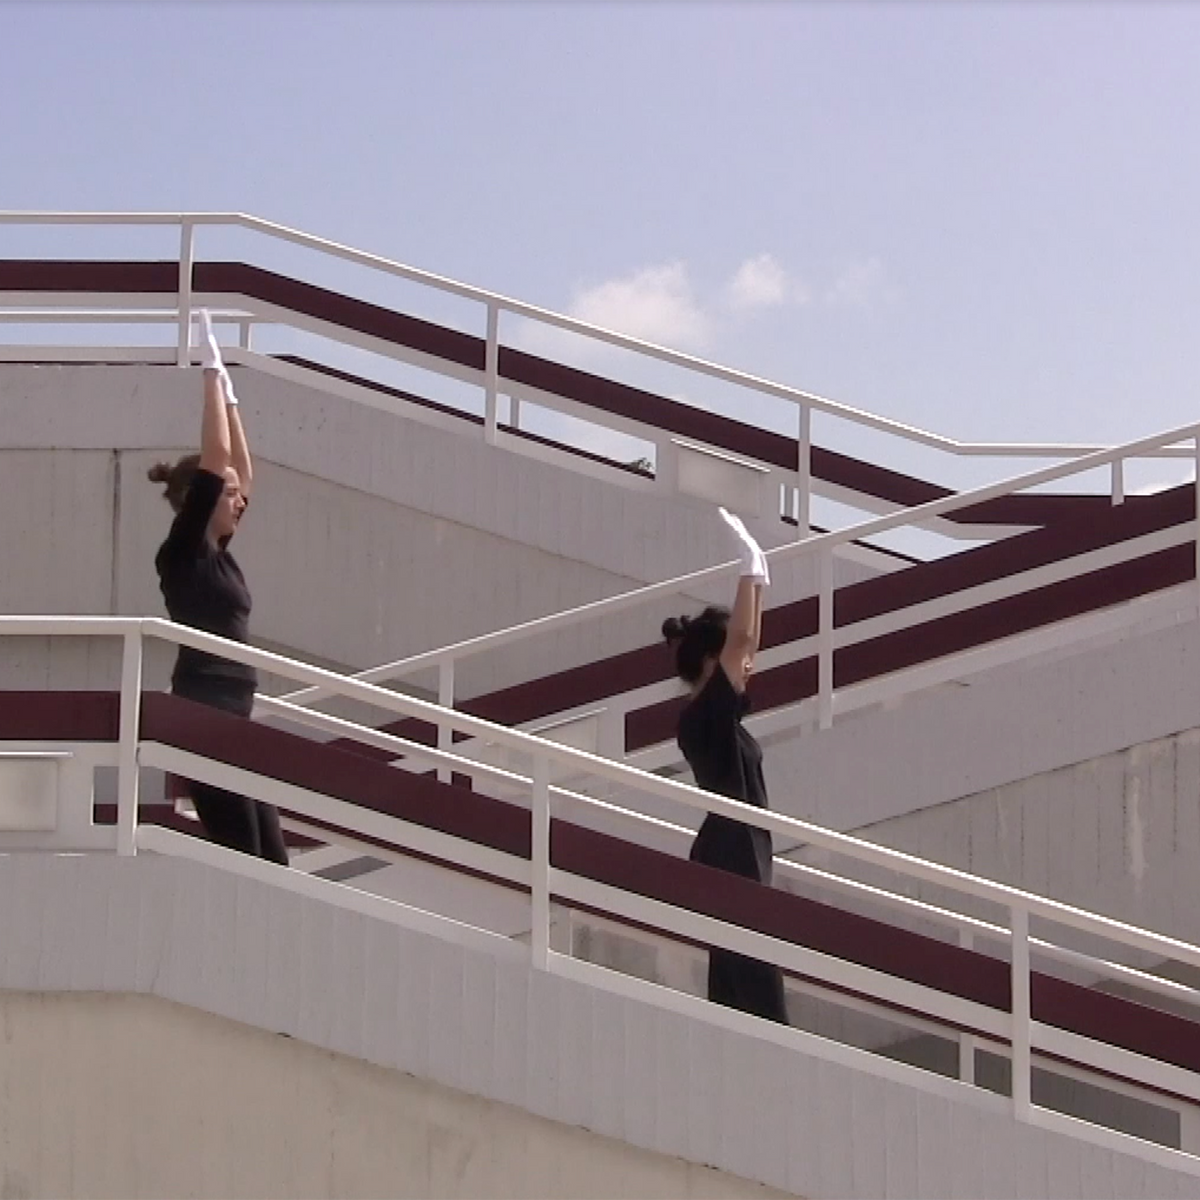 Two people dressed in black with white gloves, walking down a flight of stairs with their hands raised